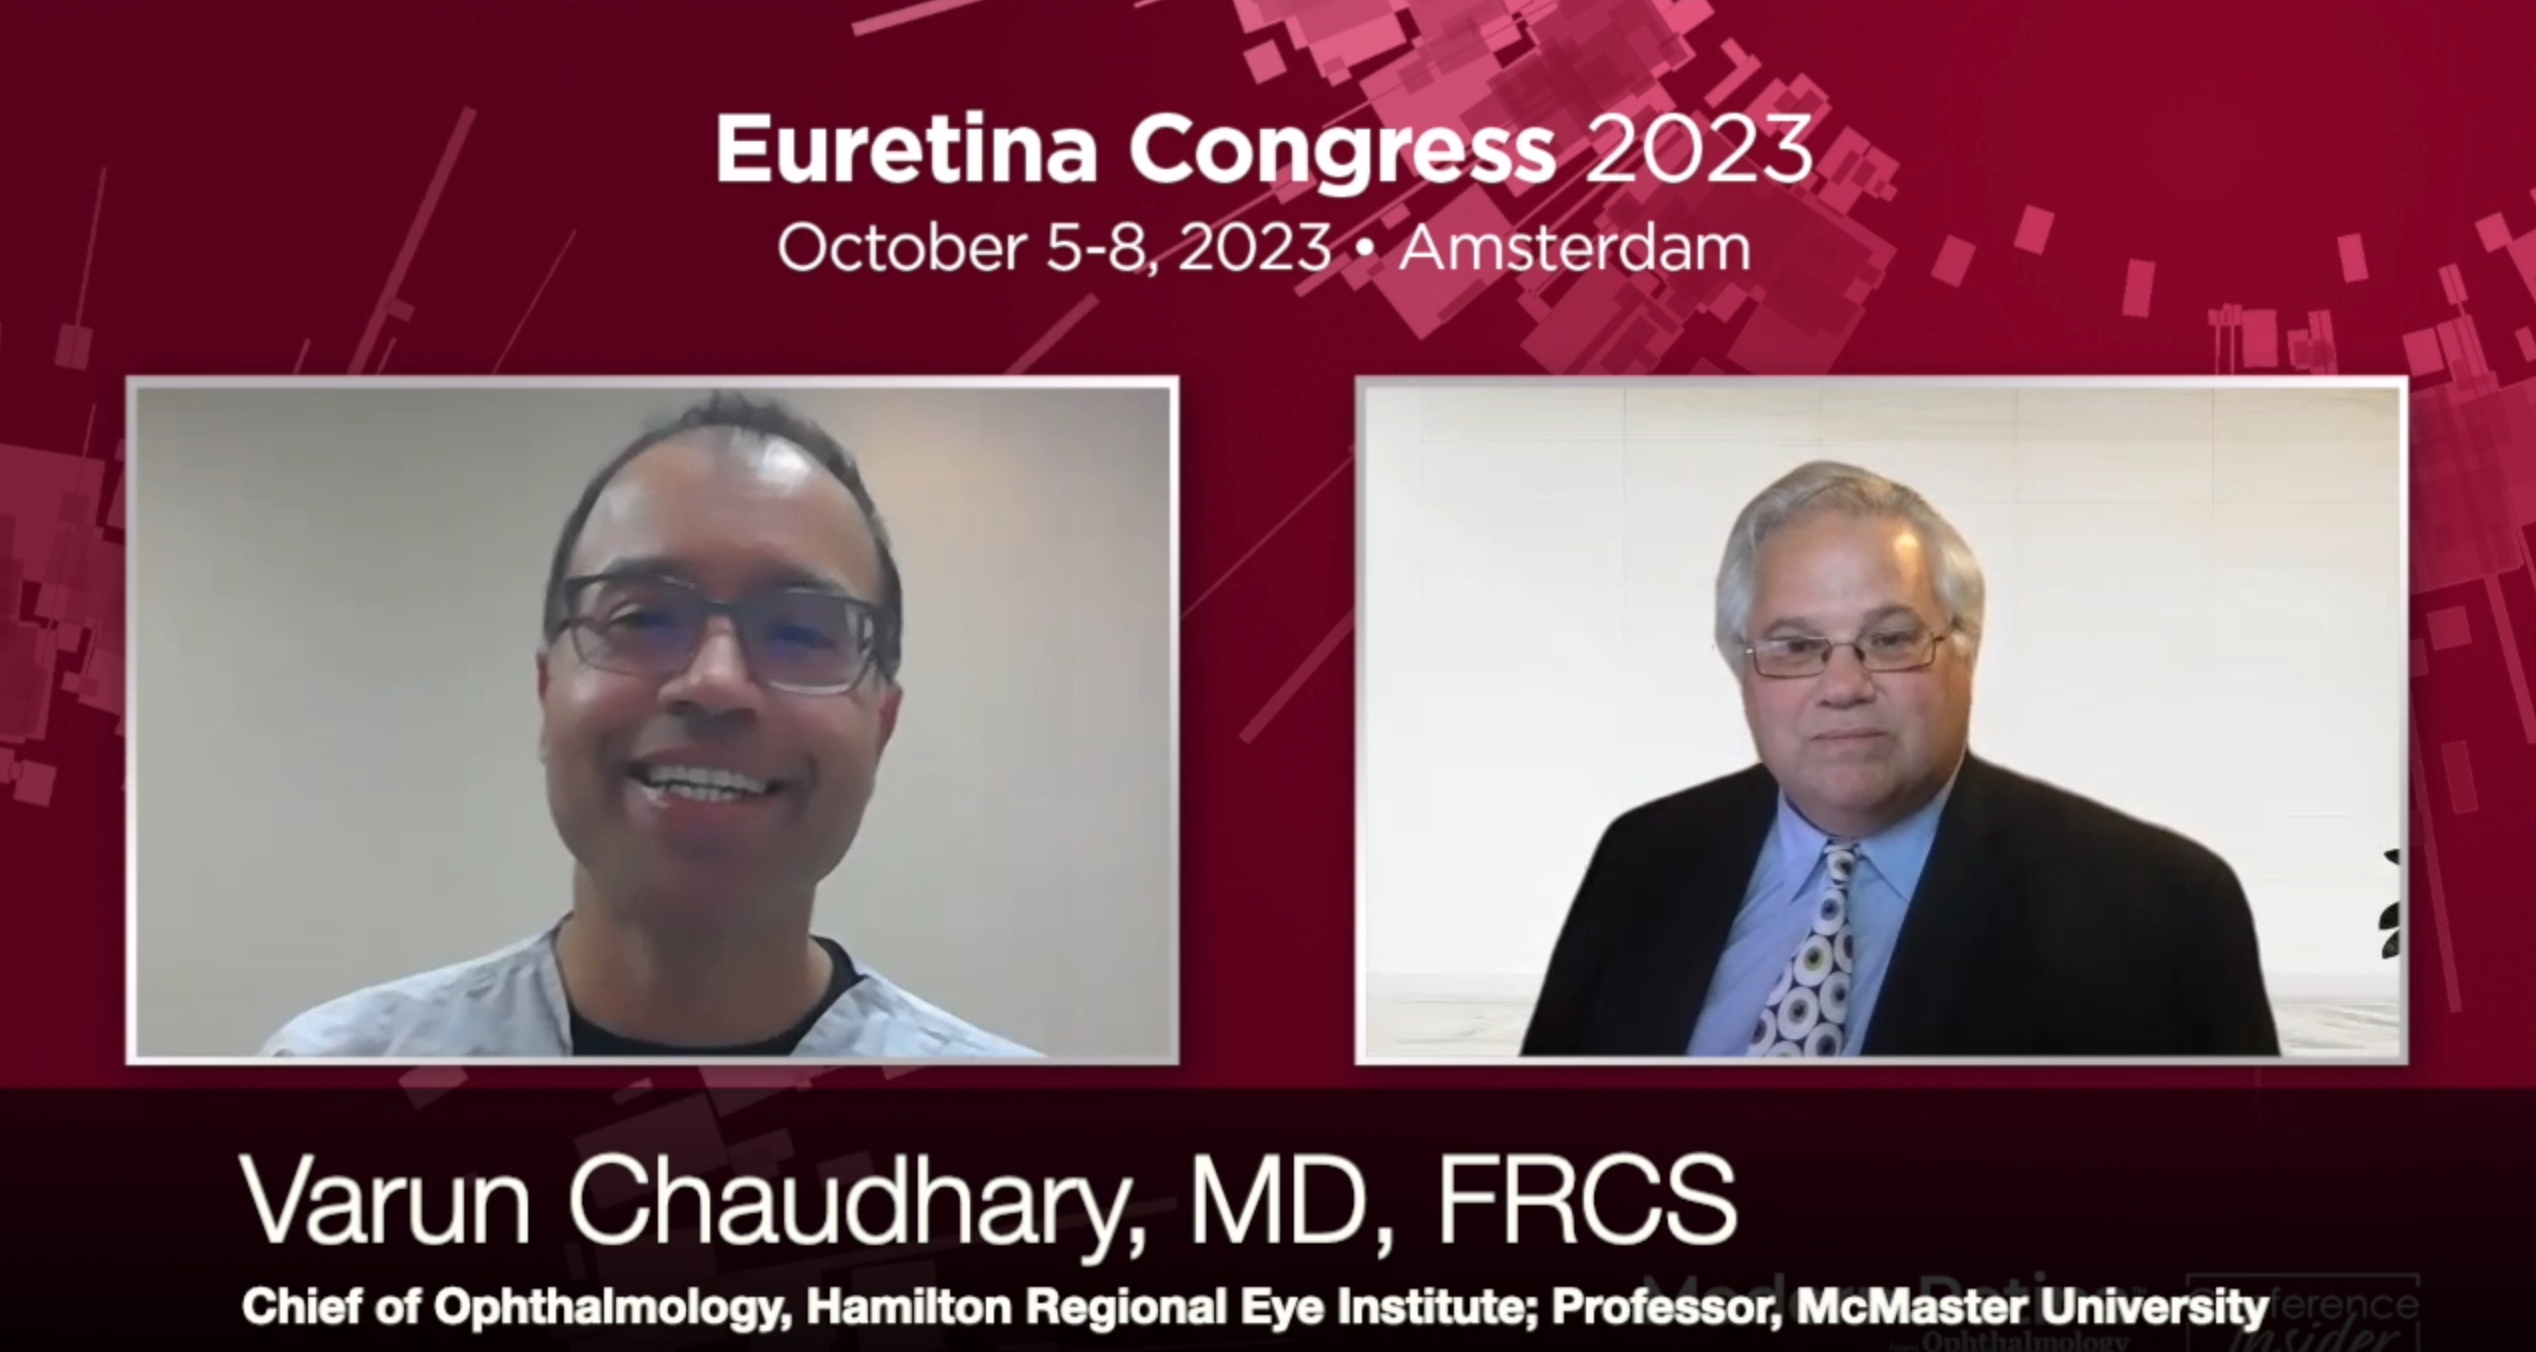 Varun Chaudhary speaks with David Hutton about the 2023 EURETINA congress